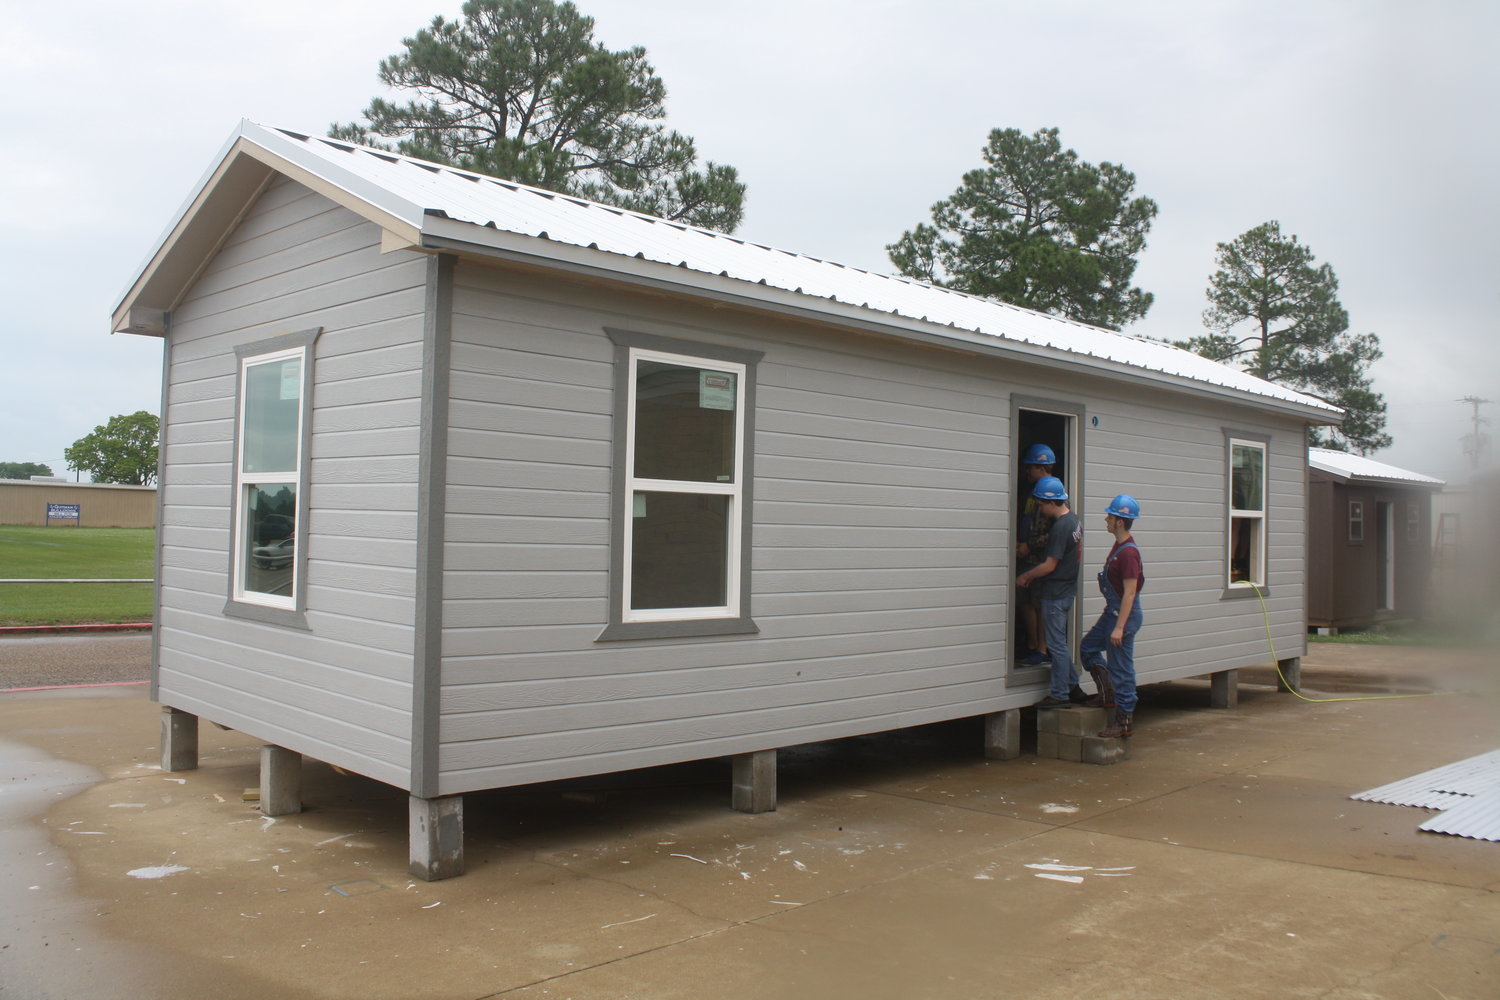 The tiny house is being built by Quitman High School “Geometry in Construction” at the back of the high school campus.